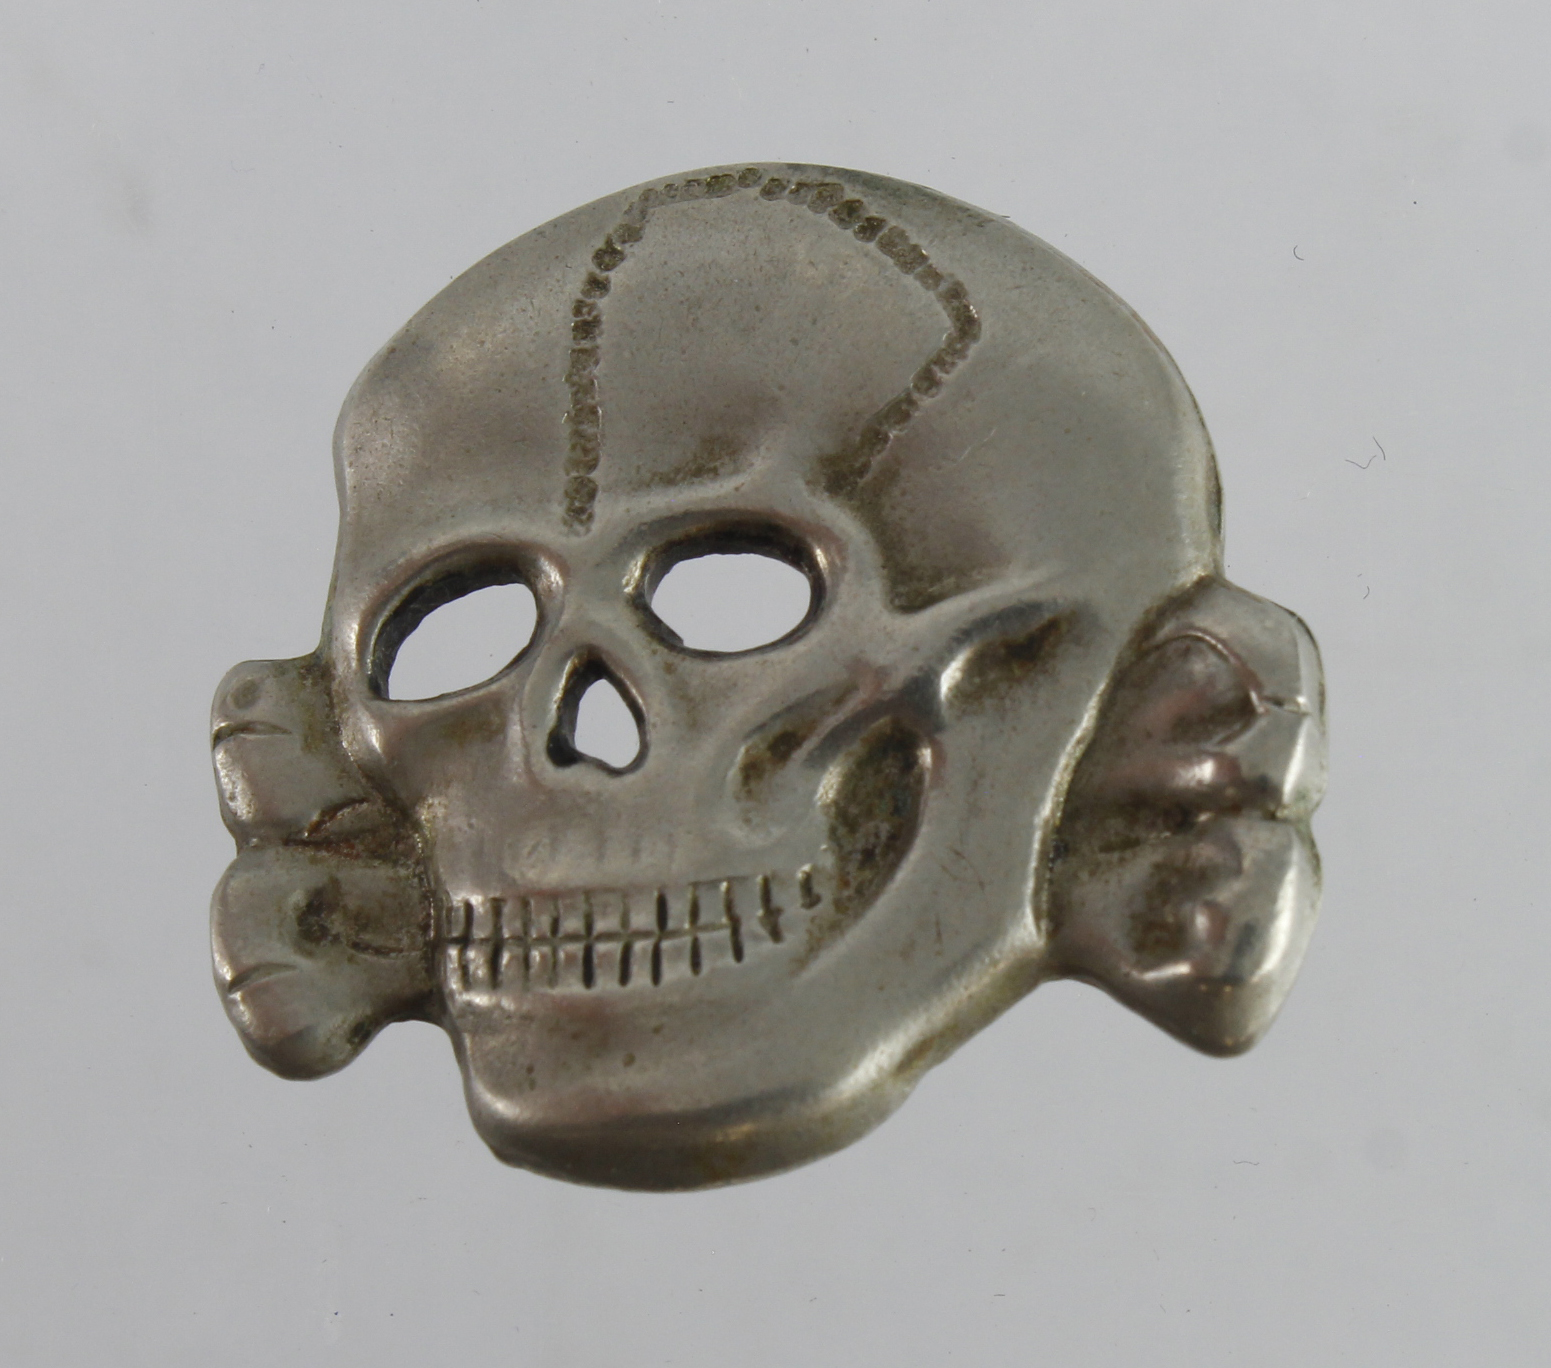 Germany from a one owner collection an SS cap skull M1/25 maker marked.